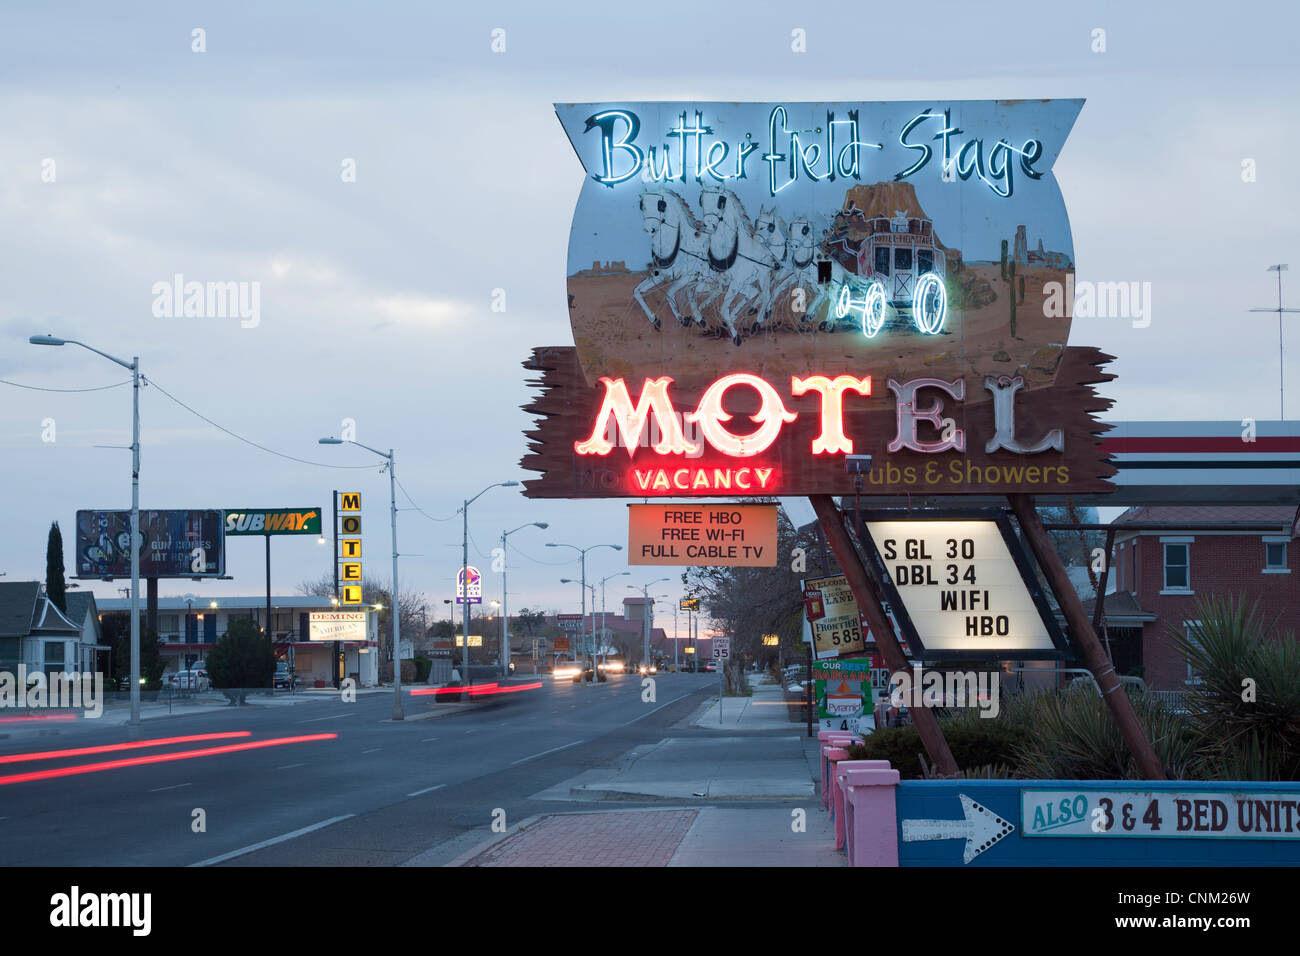 Butterfield Stage Motel and highway, Deming, New Mexico. Stock Photo